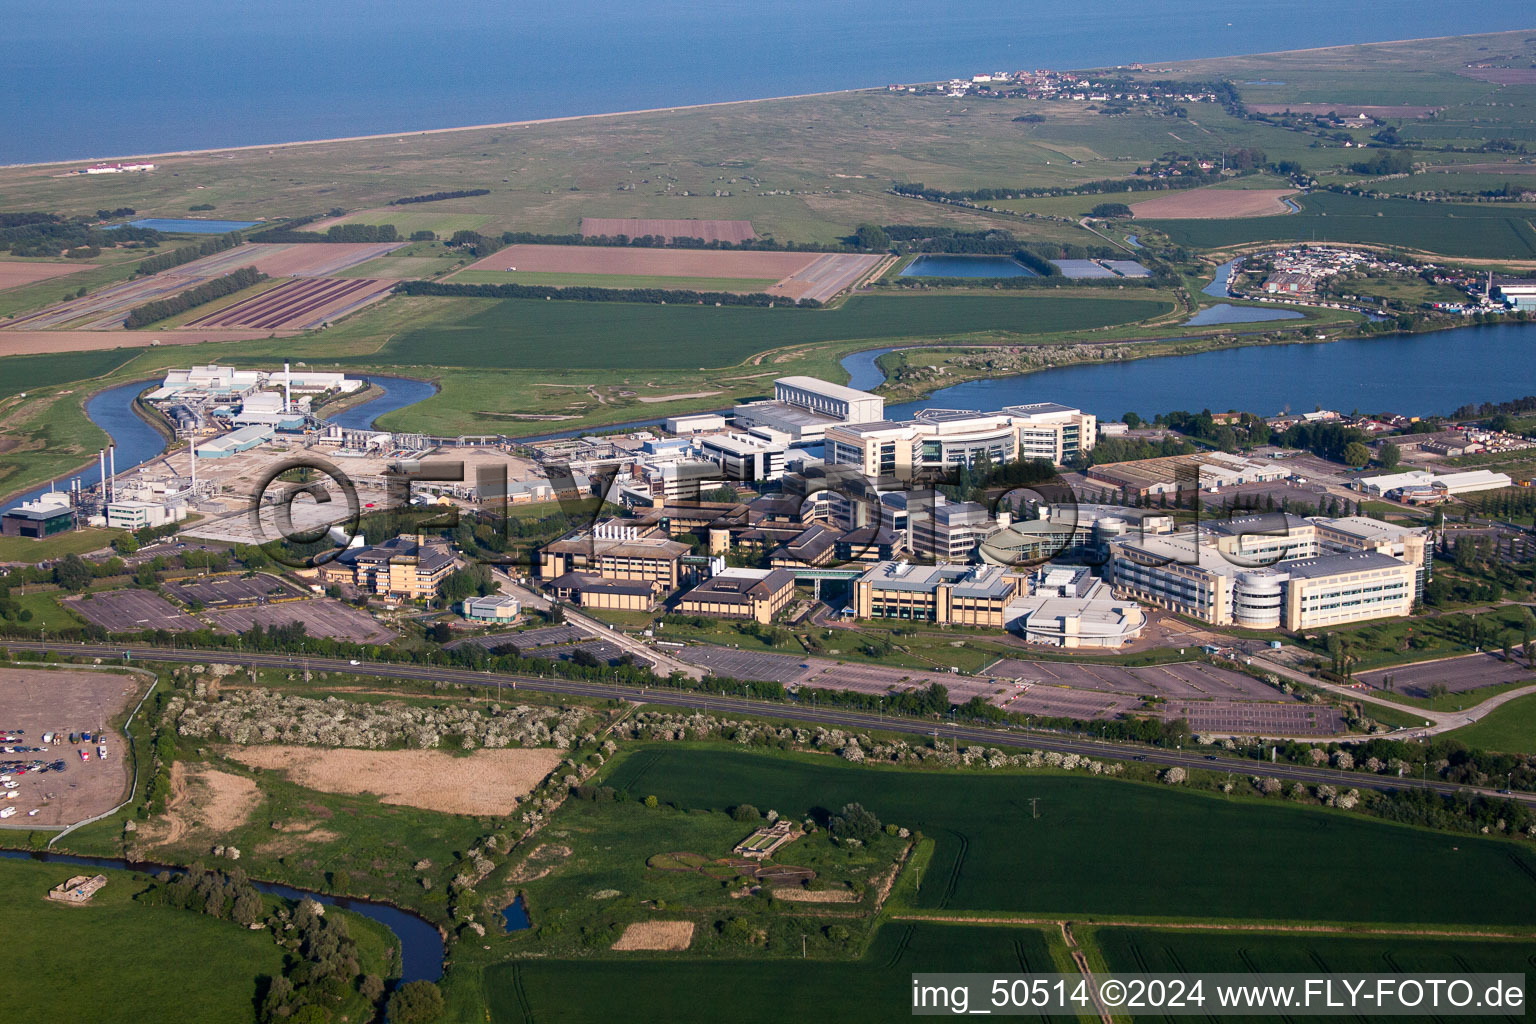 Aerial photograpy of Building and production halls on the premises of the chemical manufacturers Pfizer Ltd and Discovery Park in Sandwich in England, United Kingdom